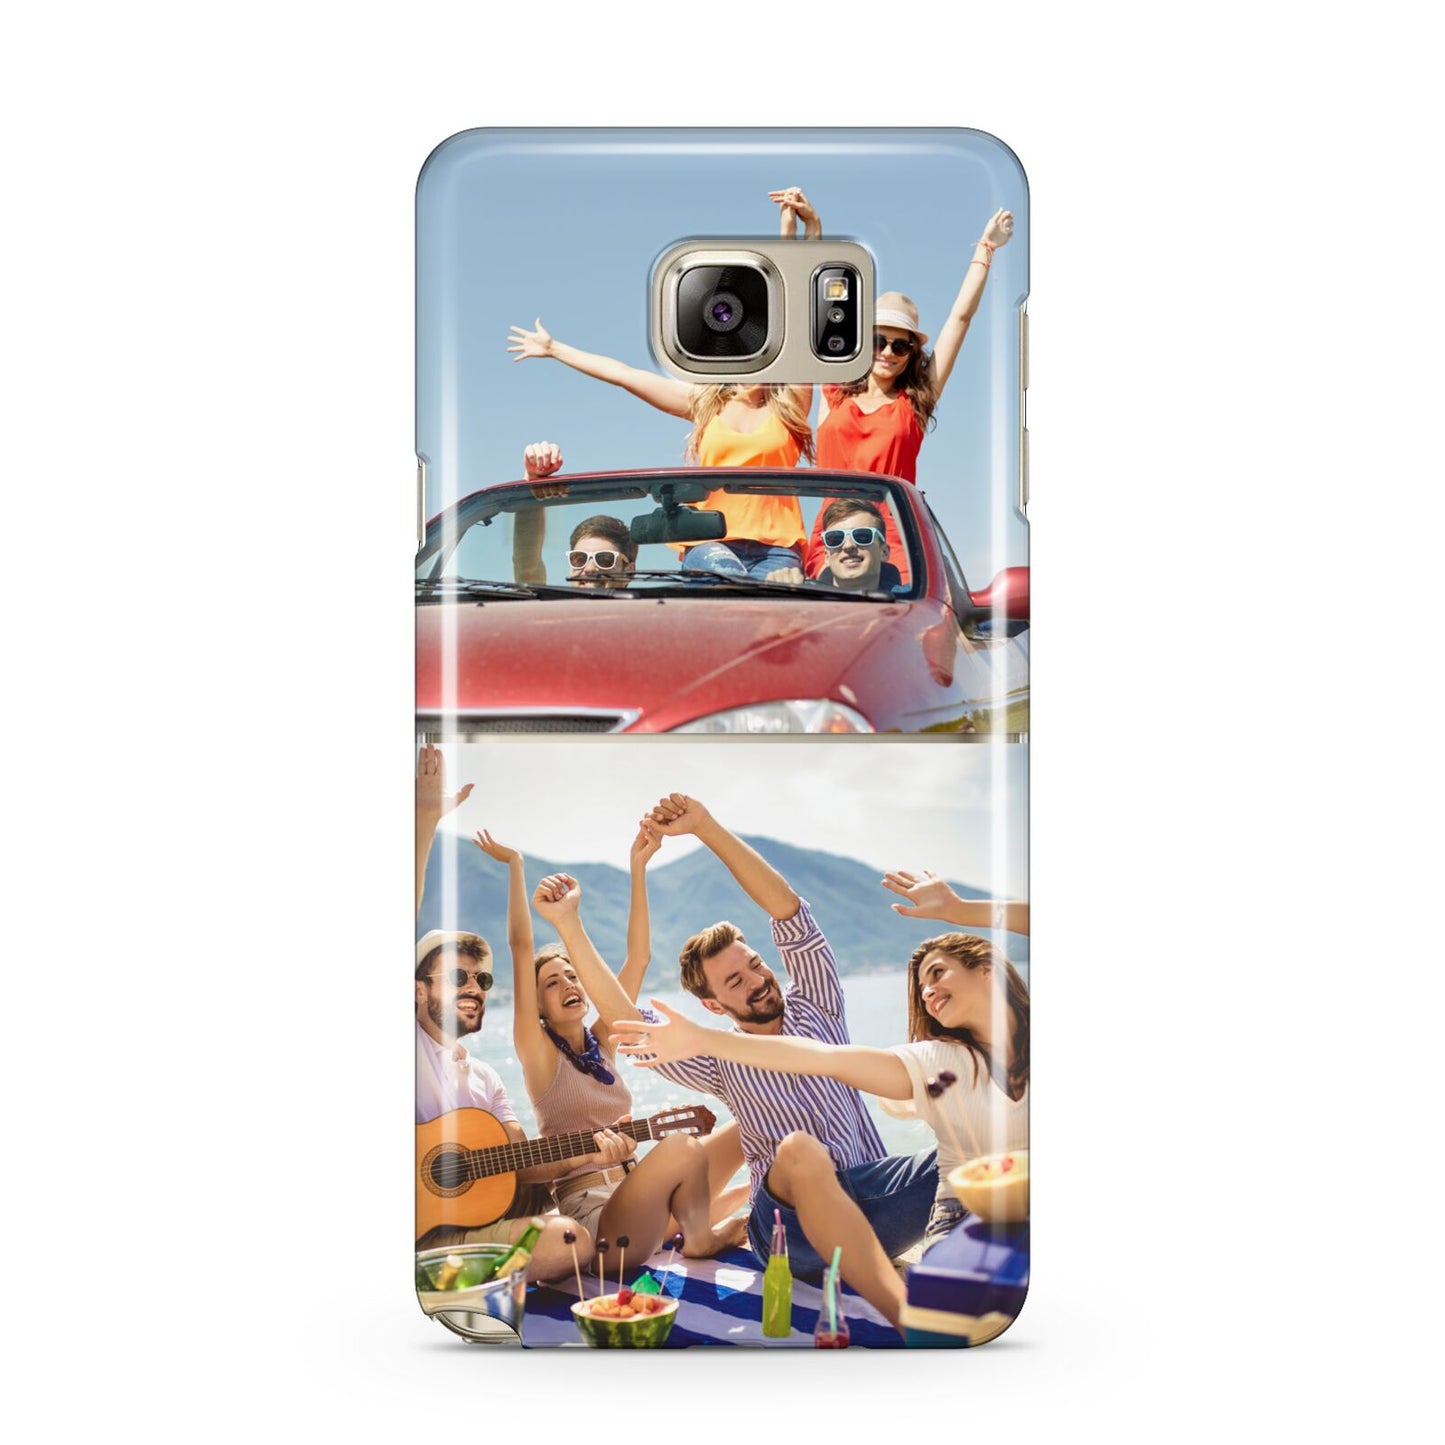 Two Photo Samsung Galaxy Note 5 Case